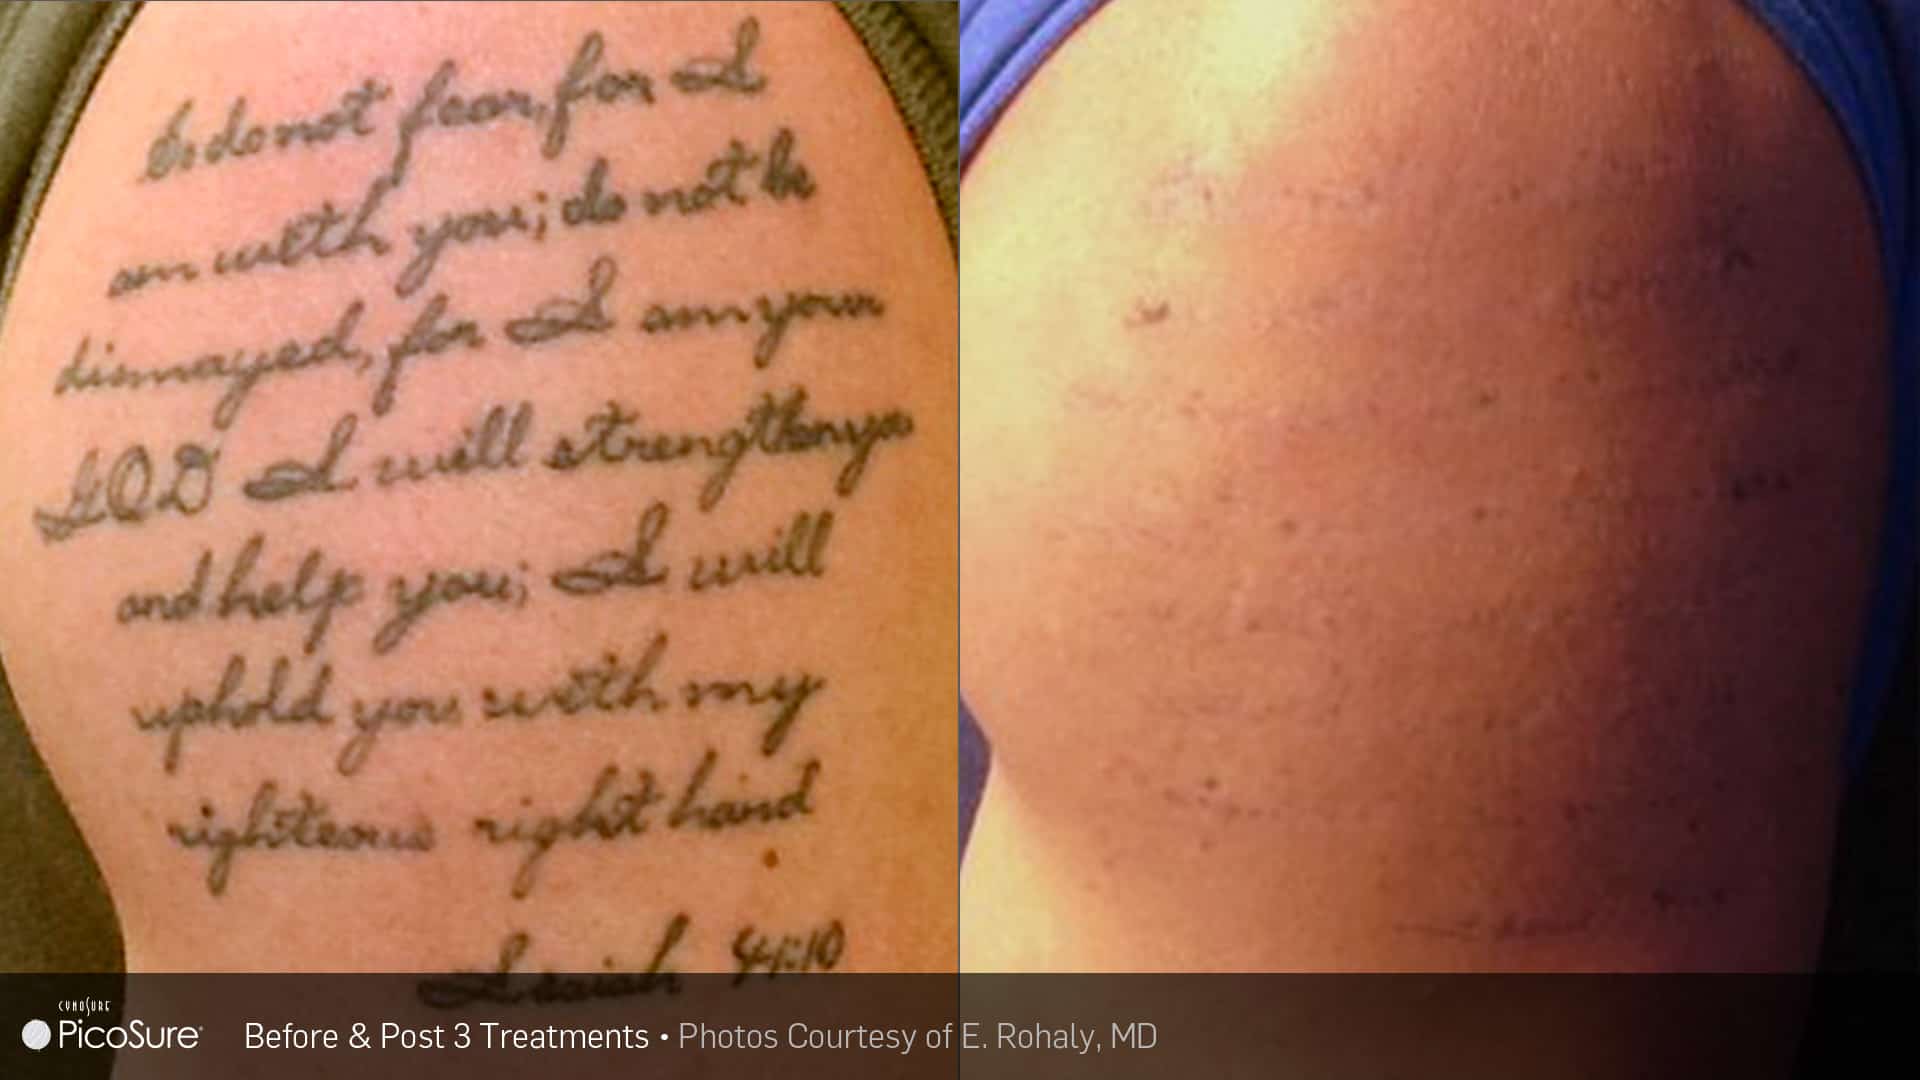 Laser Tattoo Removal Before and After